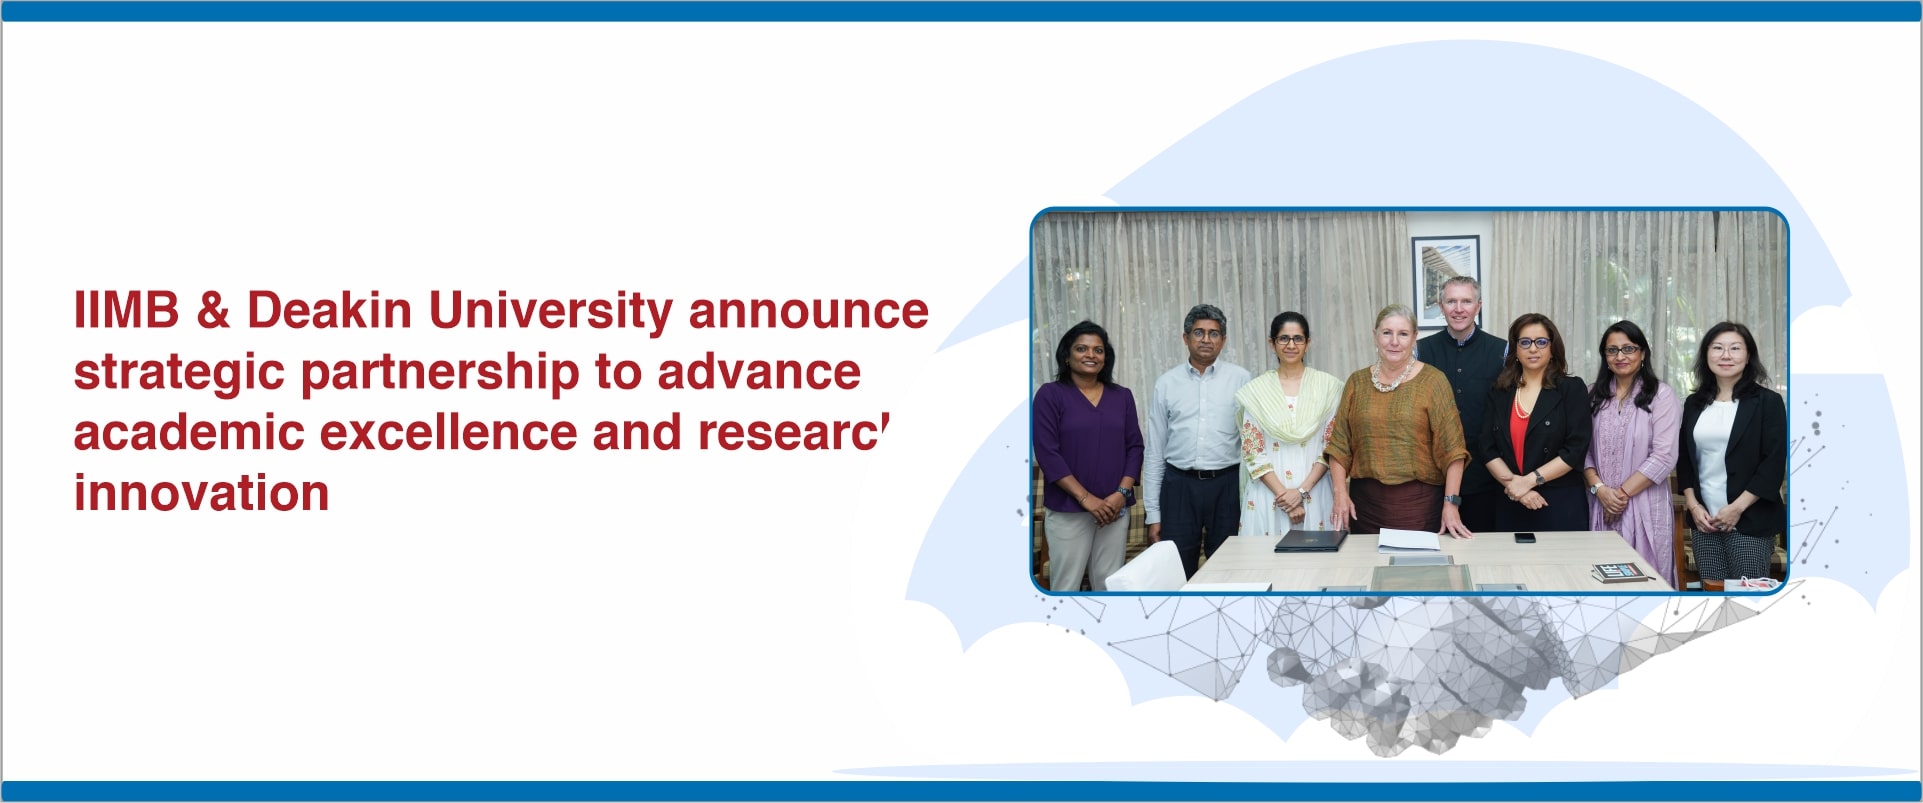 IIMB & Deakin University announce strategic partnership to advance academic excellence and research innovation 